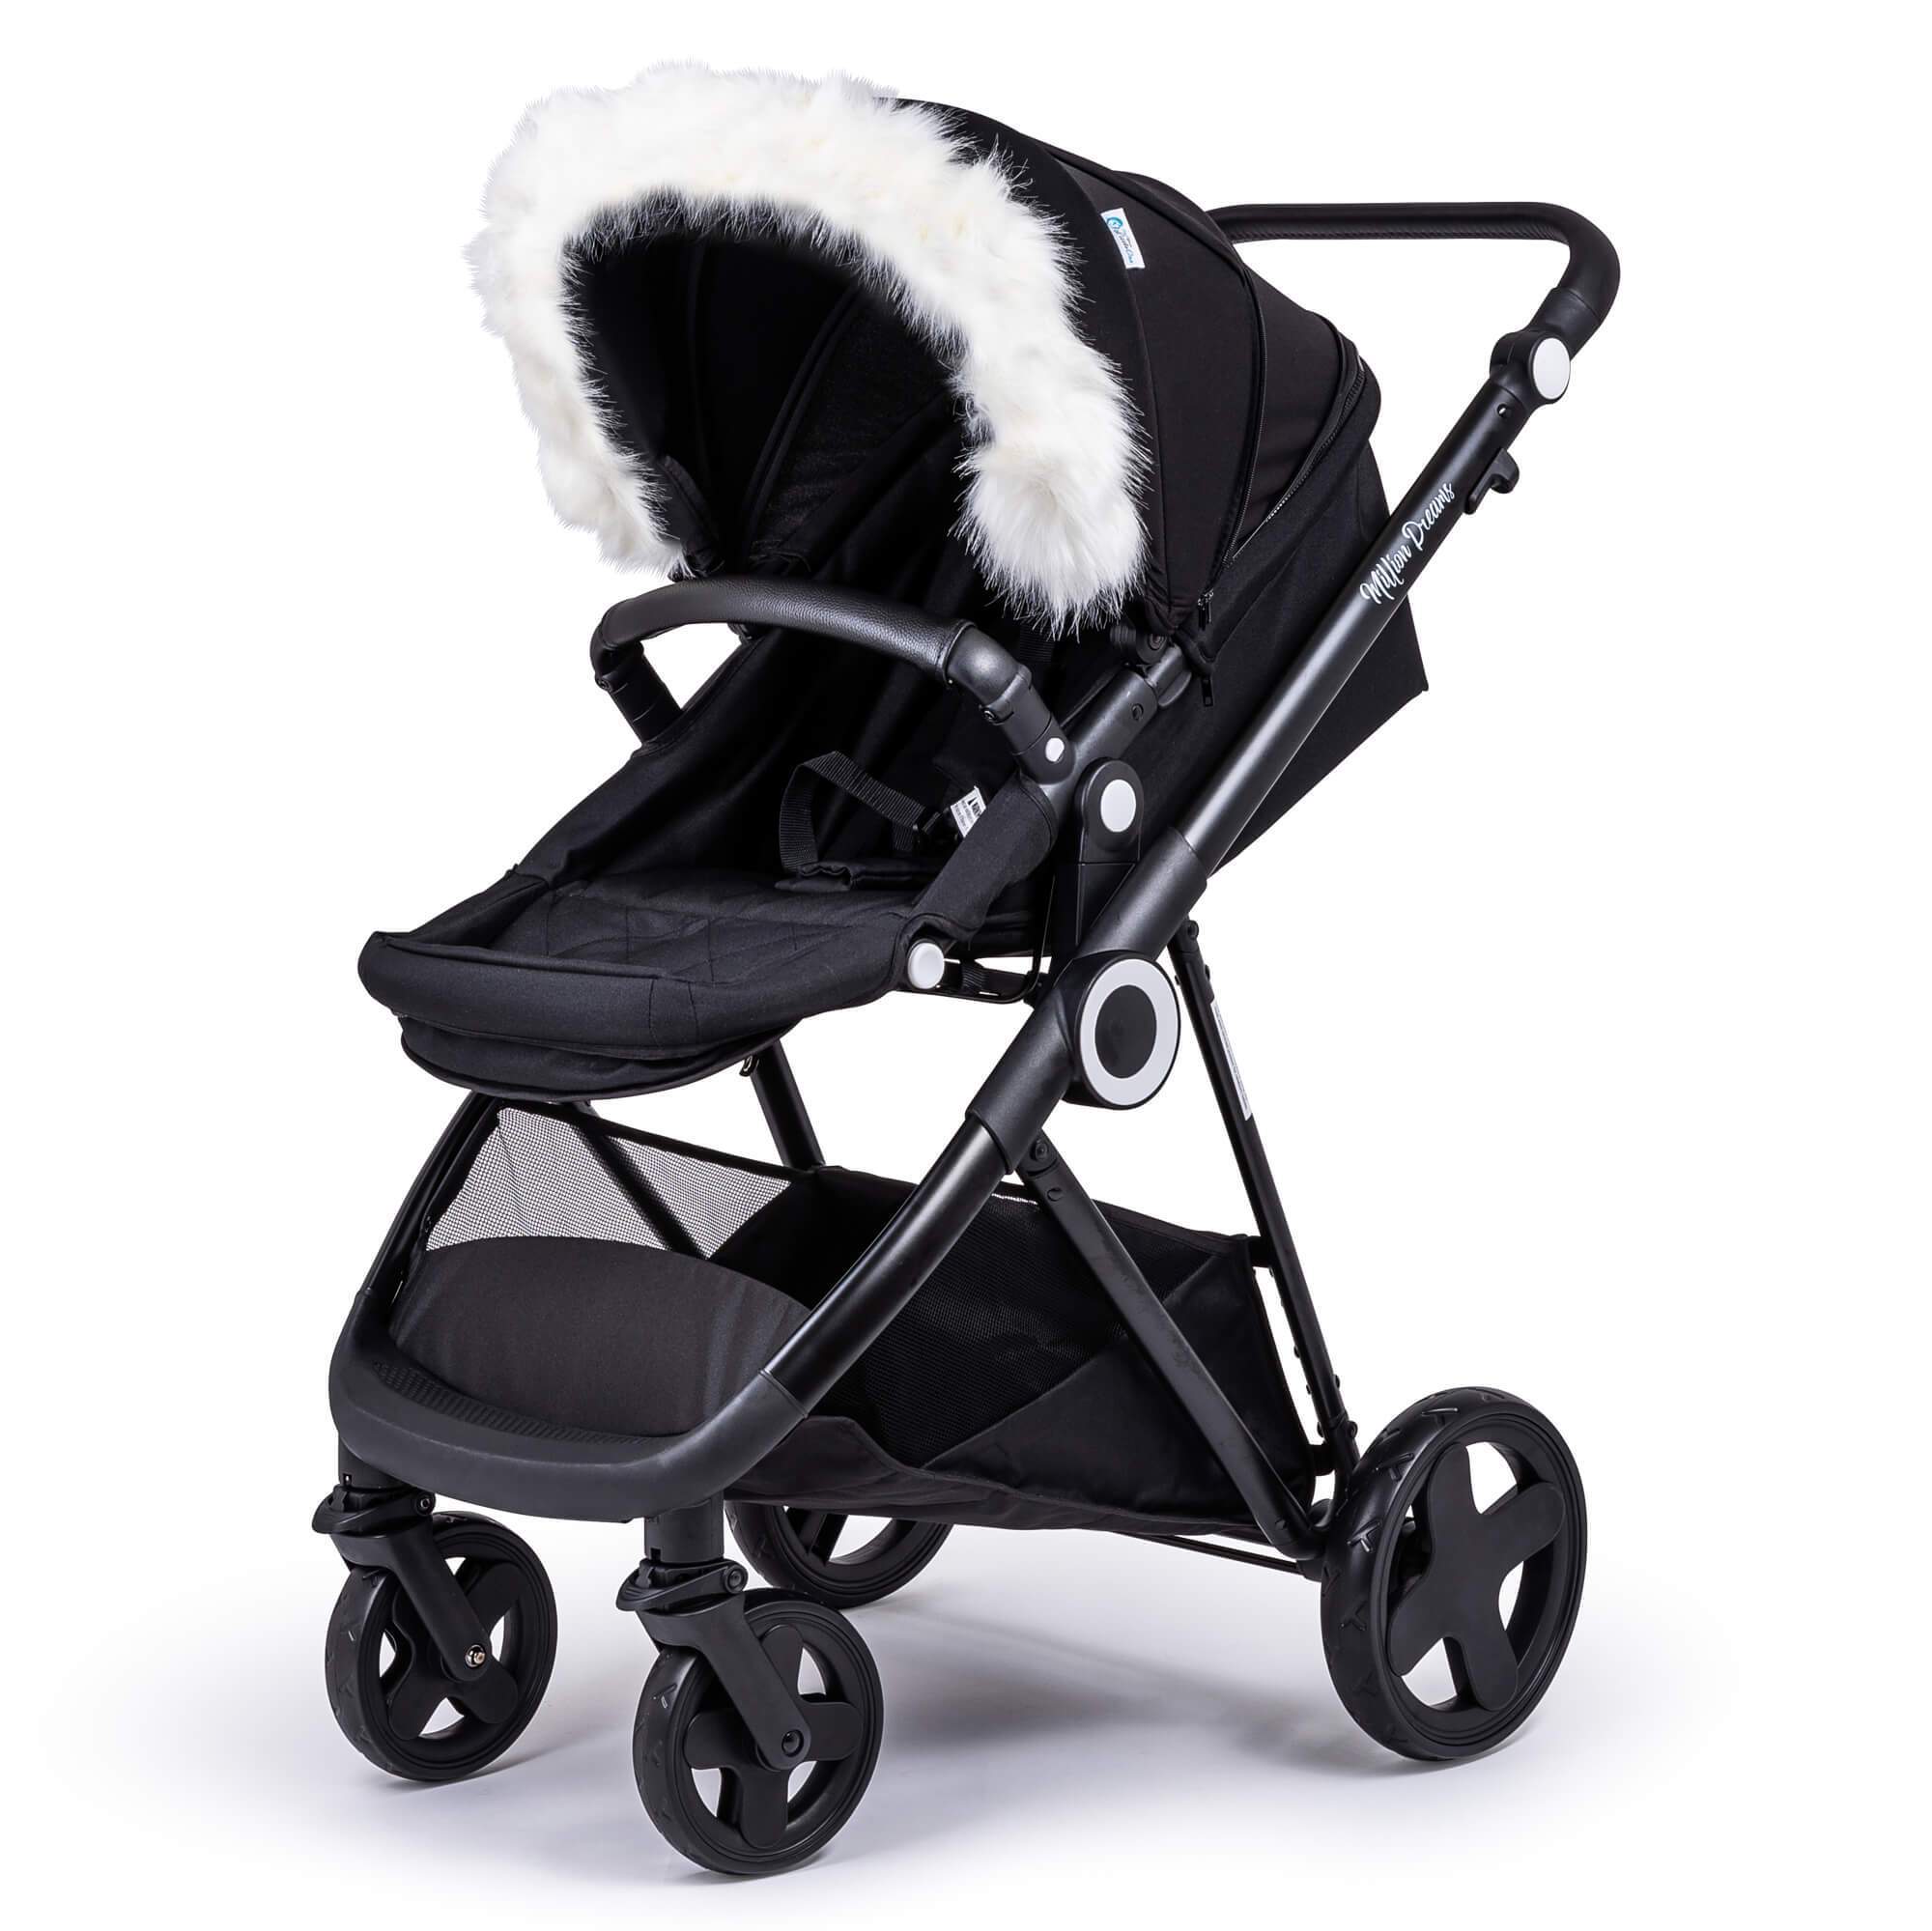 Pram Fur Hood Trim Attachment for Pushchair Compatible with Recaro - White / Fits All Models | For Your Little One